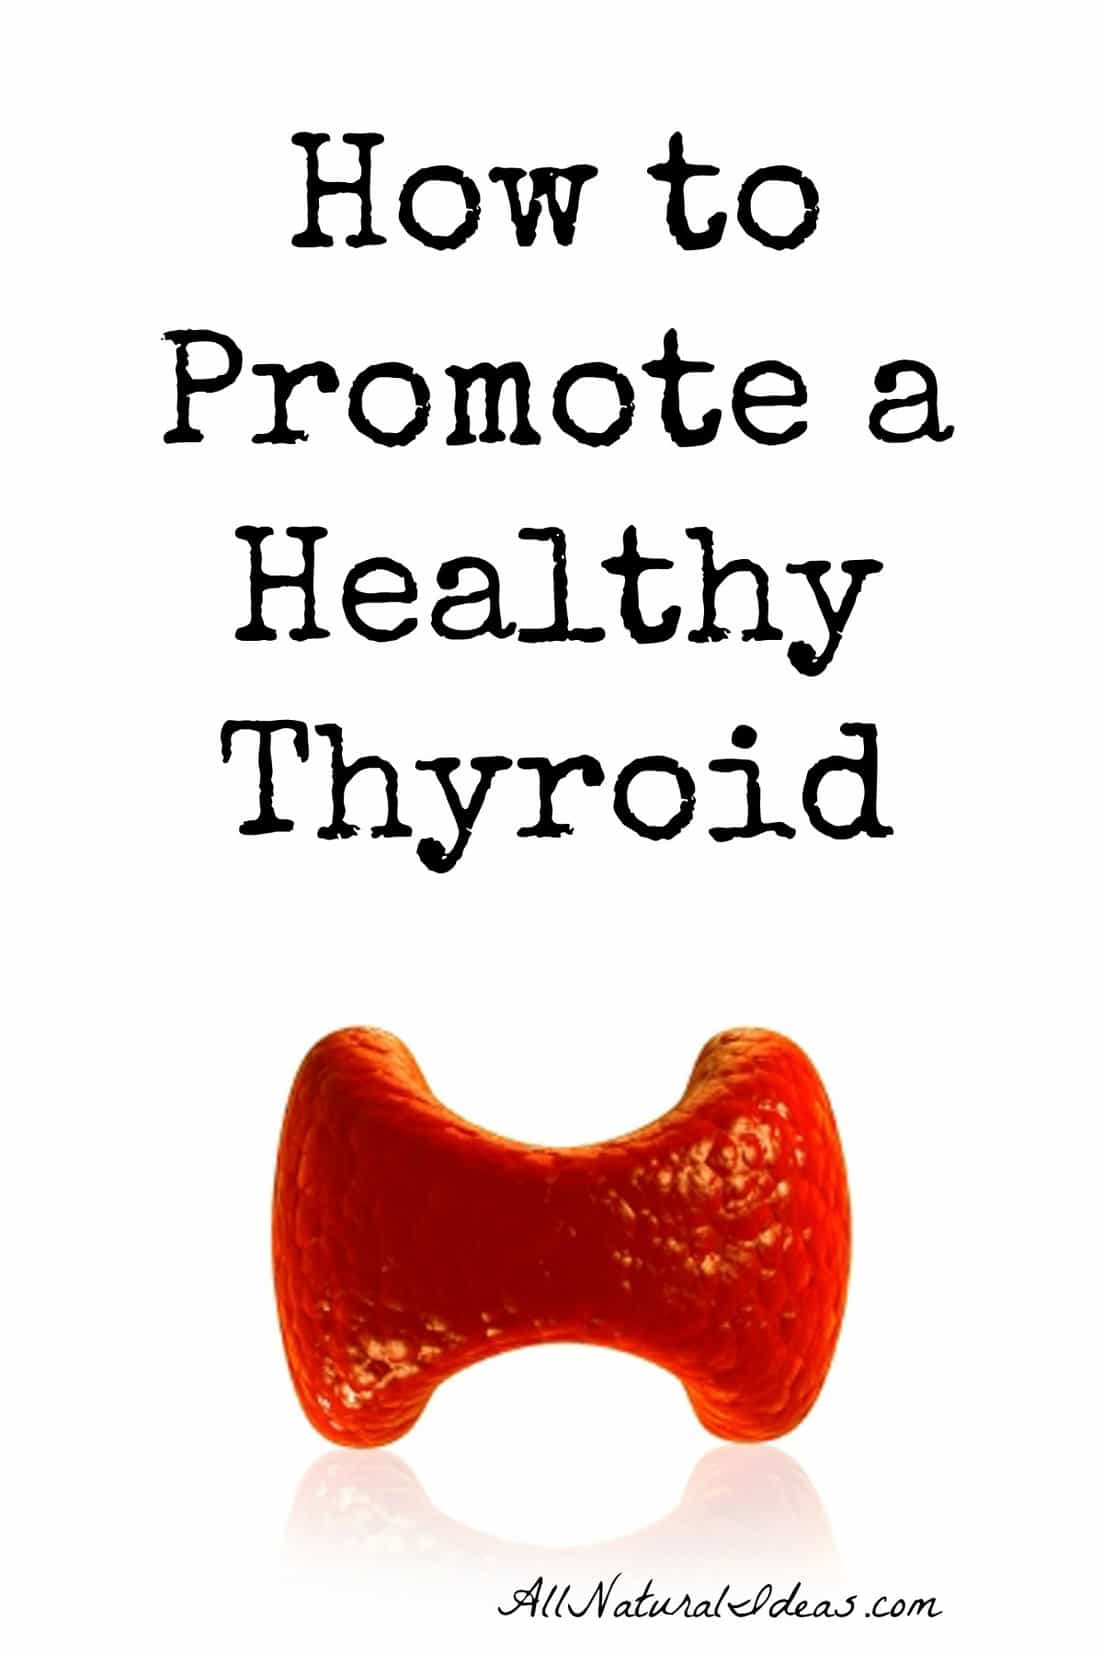 Thyroid issues are not given enough credit. The treatment is not very effective. Use these foods and tips to promoting a healthy thyroid!